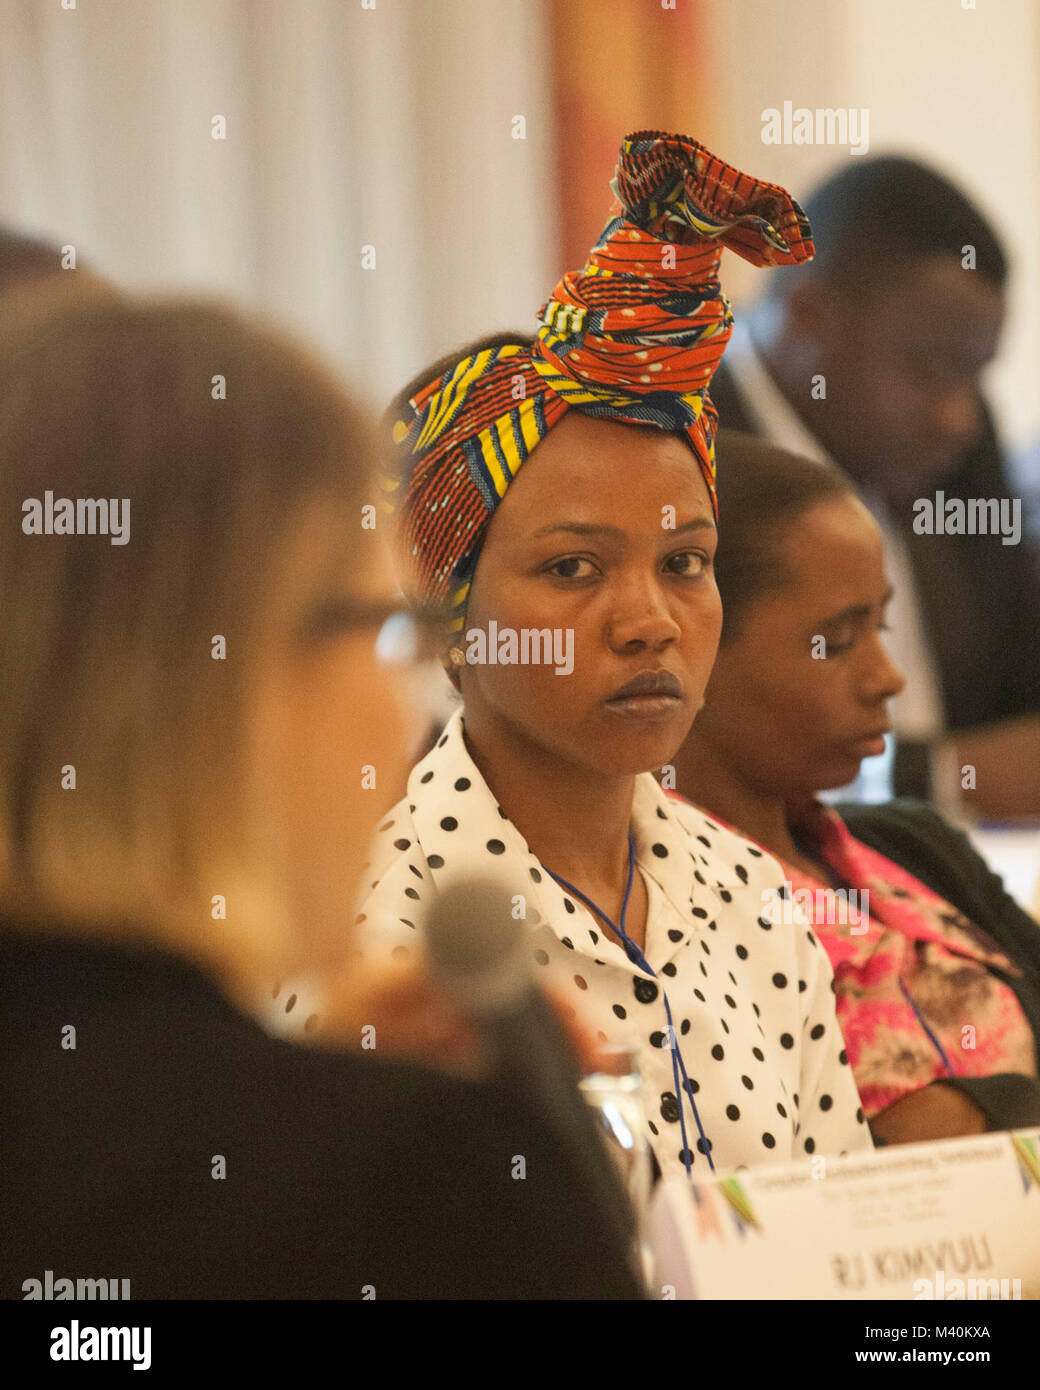 Ms. Saumu Mwanyoka (center), a member of the Tanzanian Peoples Defense Force, participates the 2015 Gender Mainstreaming Seminar in Arusha, Tanzania on May 21. United States Army Africa (USARAF) co-hosted the conference, along side the Tanzanian Peoples Defense Force, in an effort to frame the importance of gender mainstreaming and promote equality throughout the region. (DoD News photo by Staff Sgt. Brian Kimball) 150521-F-QP401-063 by DoD News Photos Stock Photo